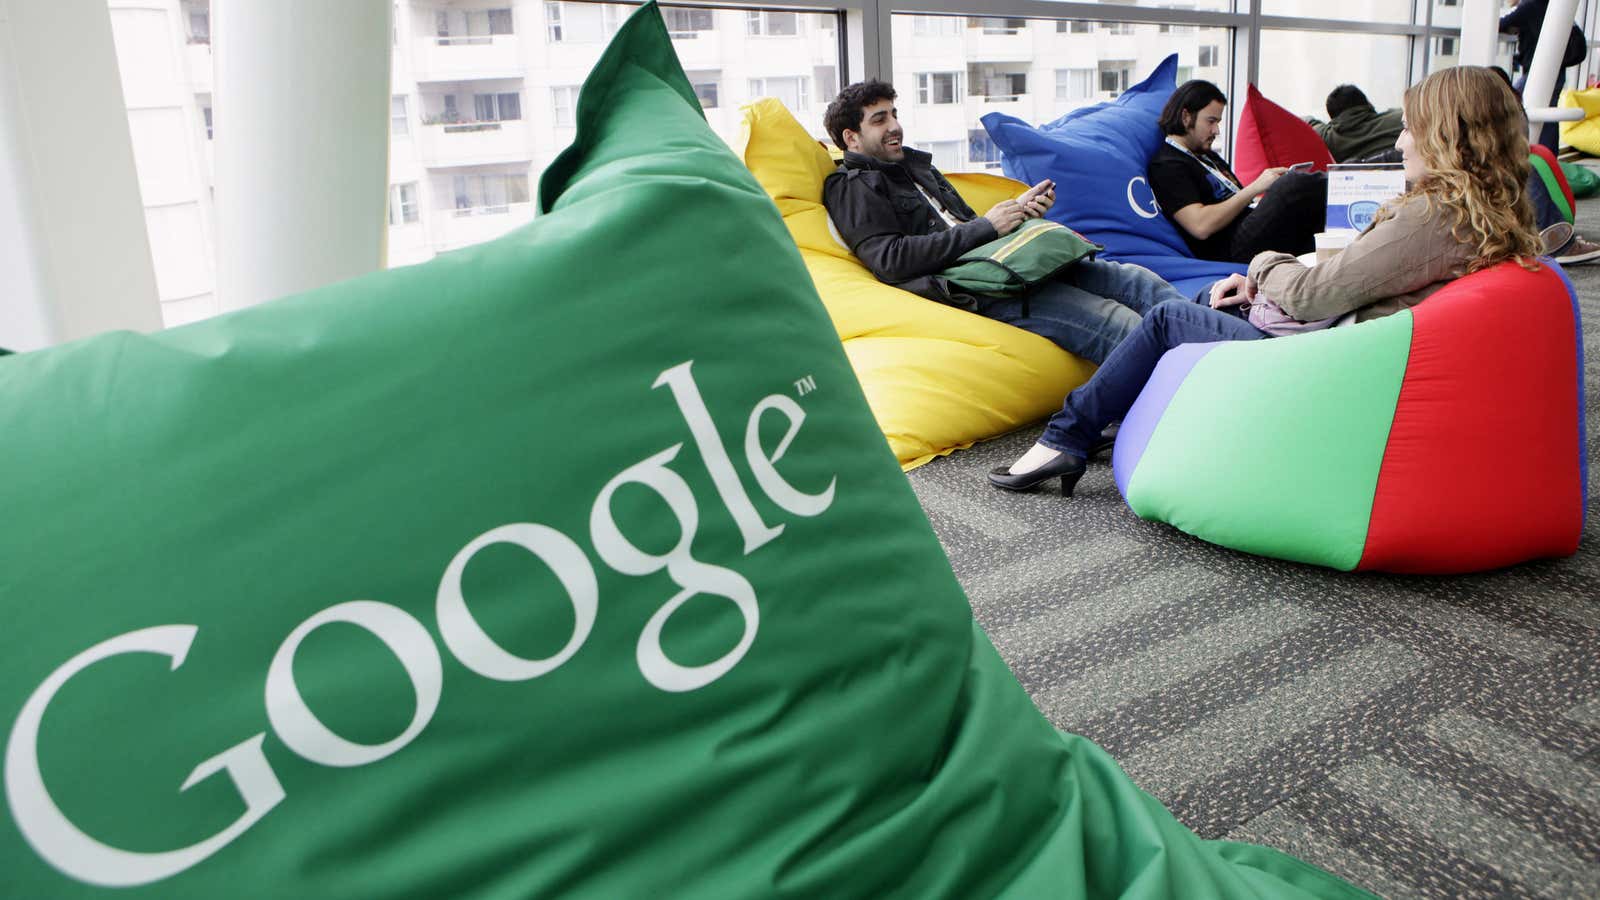 Q: How many giant pillows does Larry Page need to sleep at night? A: 7